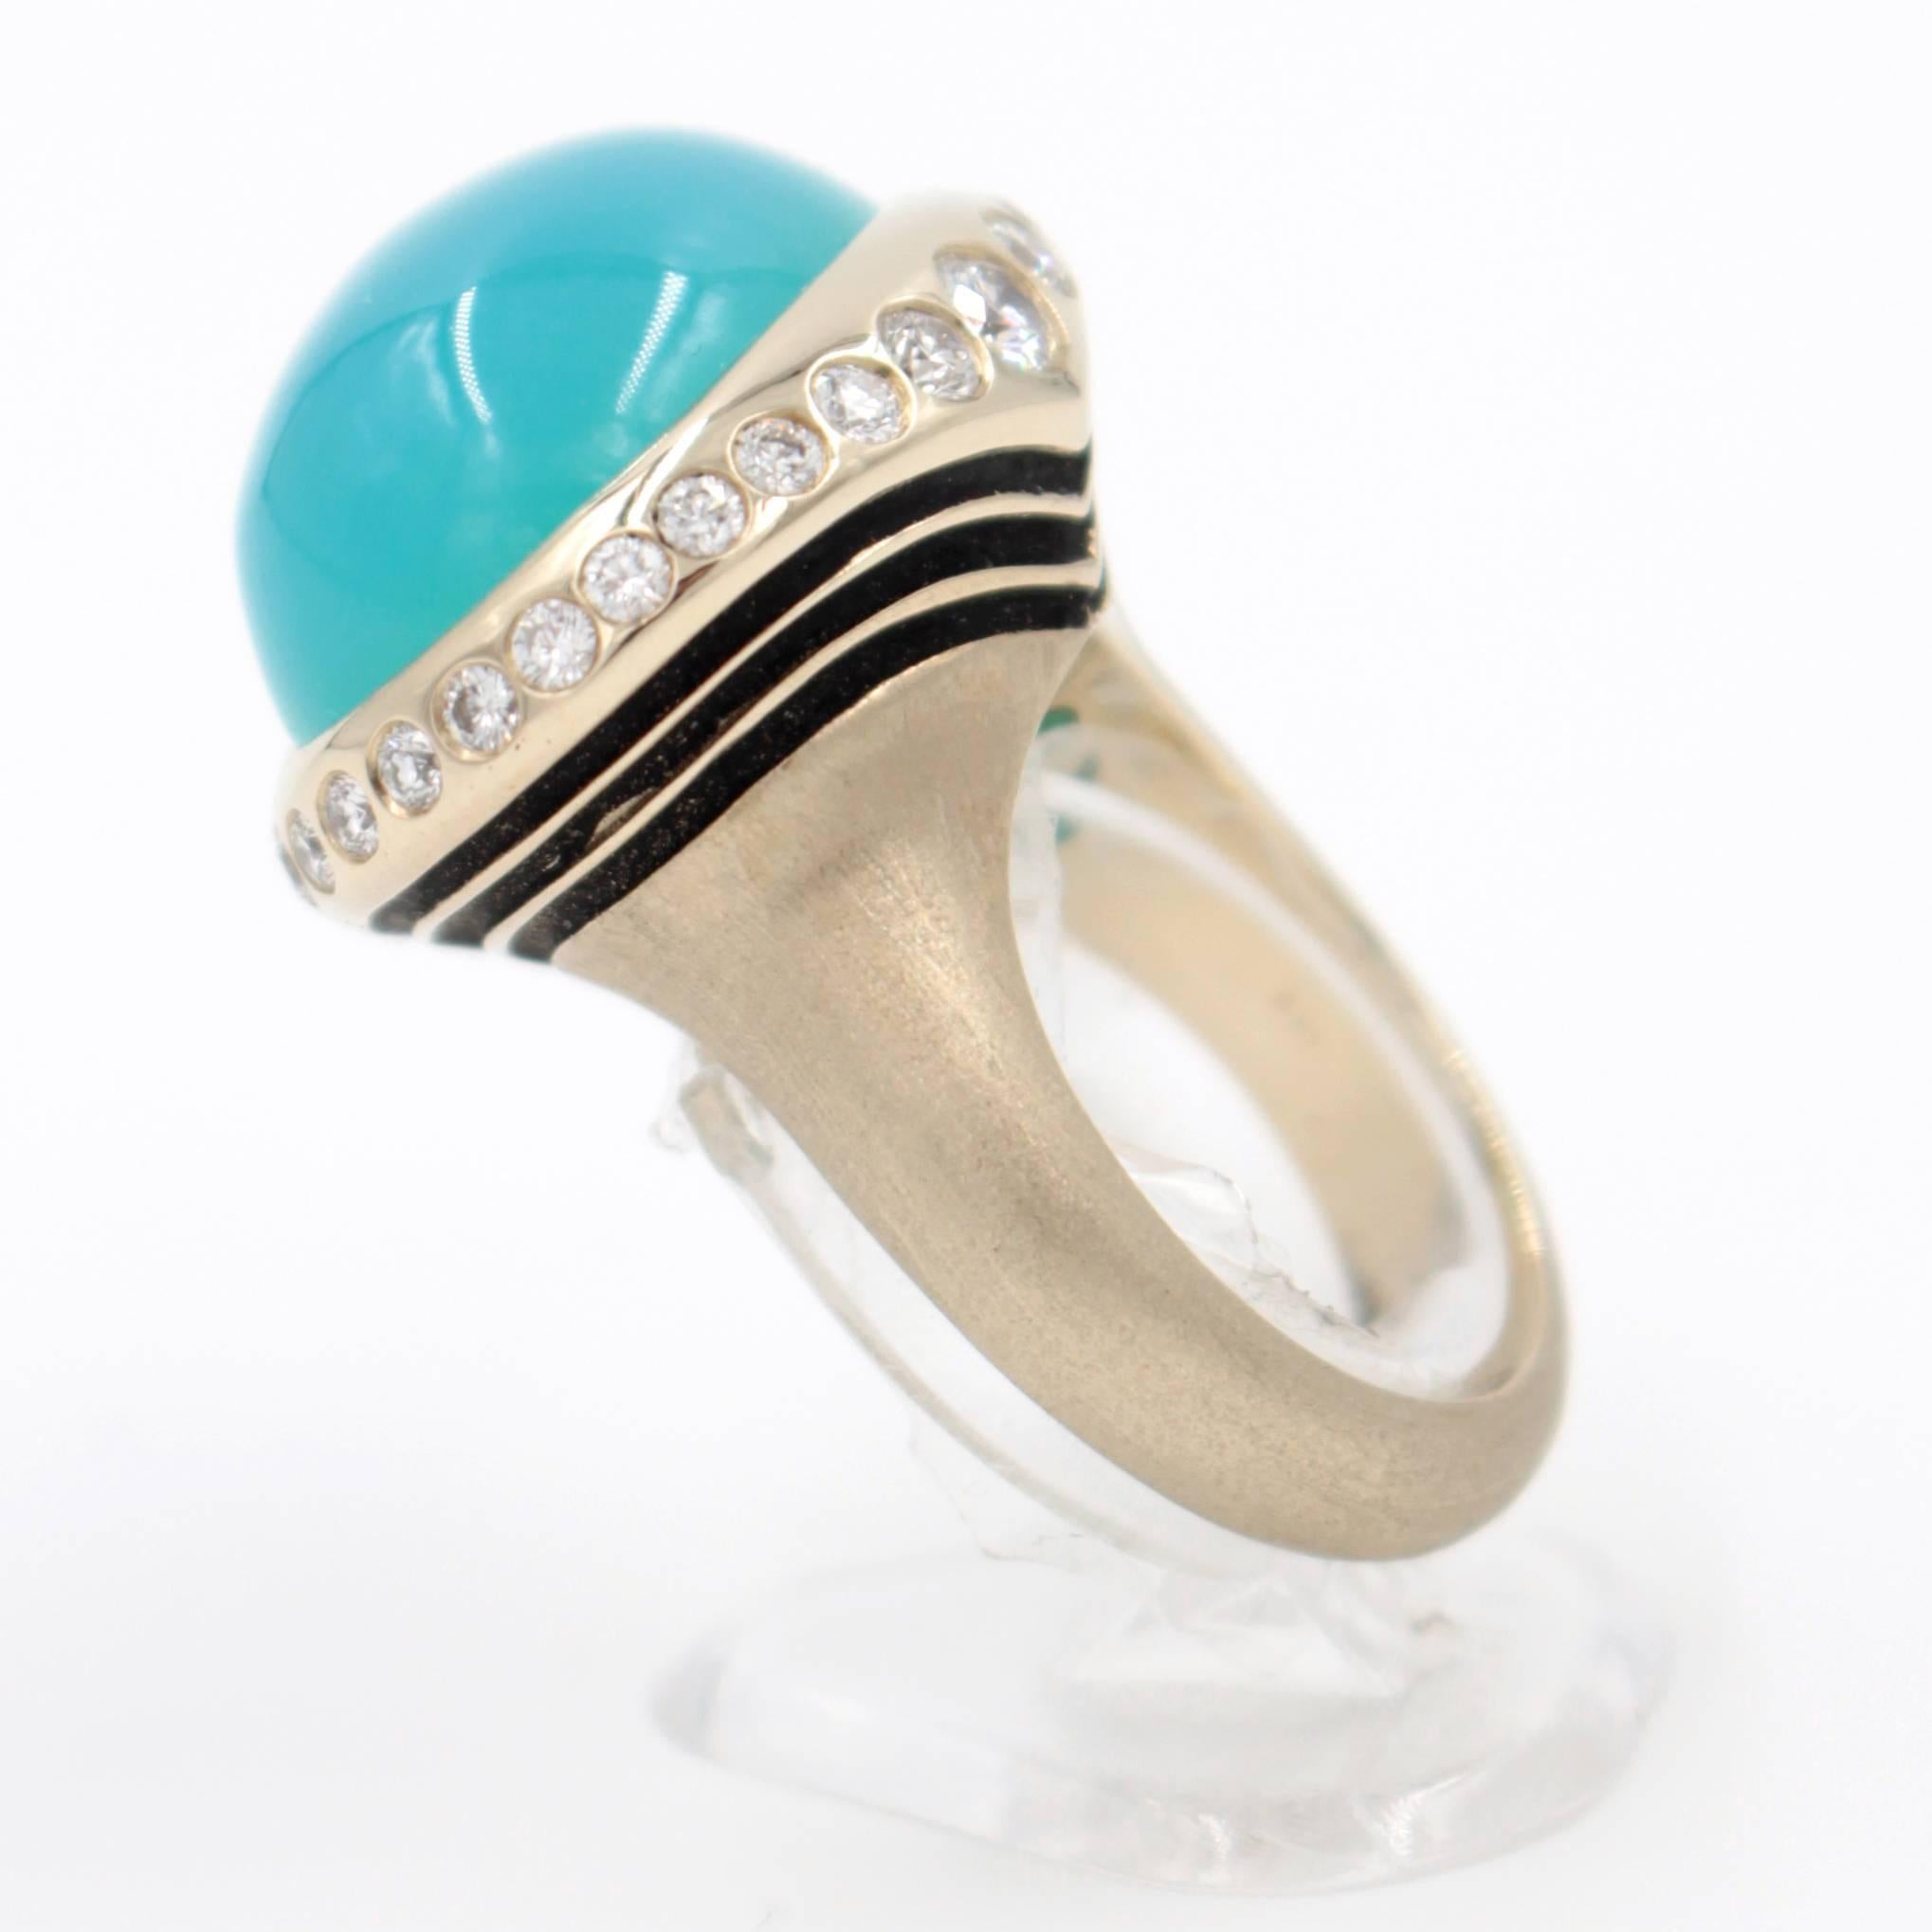 This delightful  ring is 18 karat yellow gold set with a large blue 20 carat chalcedony cabochon surrounded by .96 carats of round brilliant diamonds.